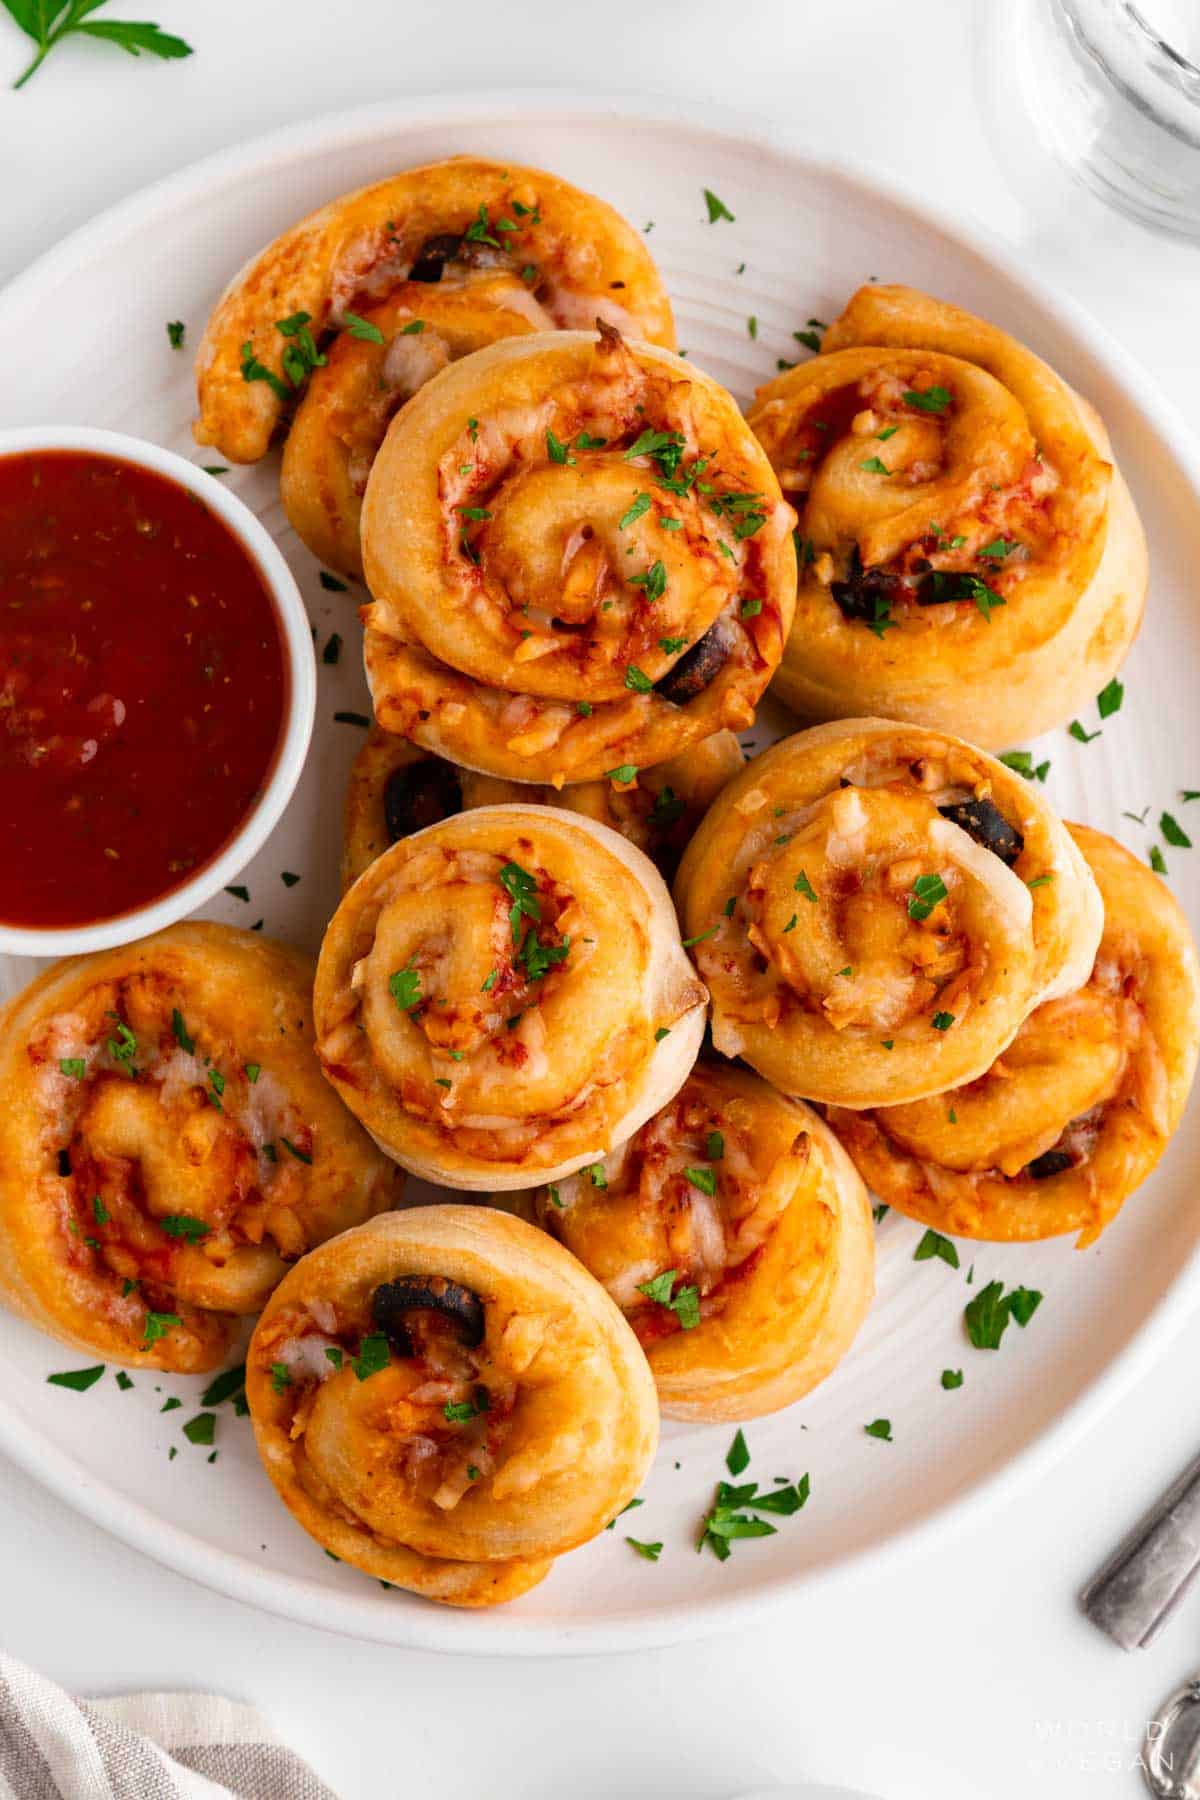 A plate of vegan pizza rolls served with marinara sauce.